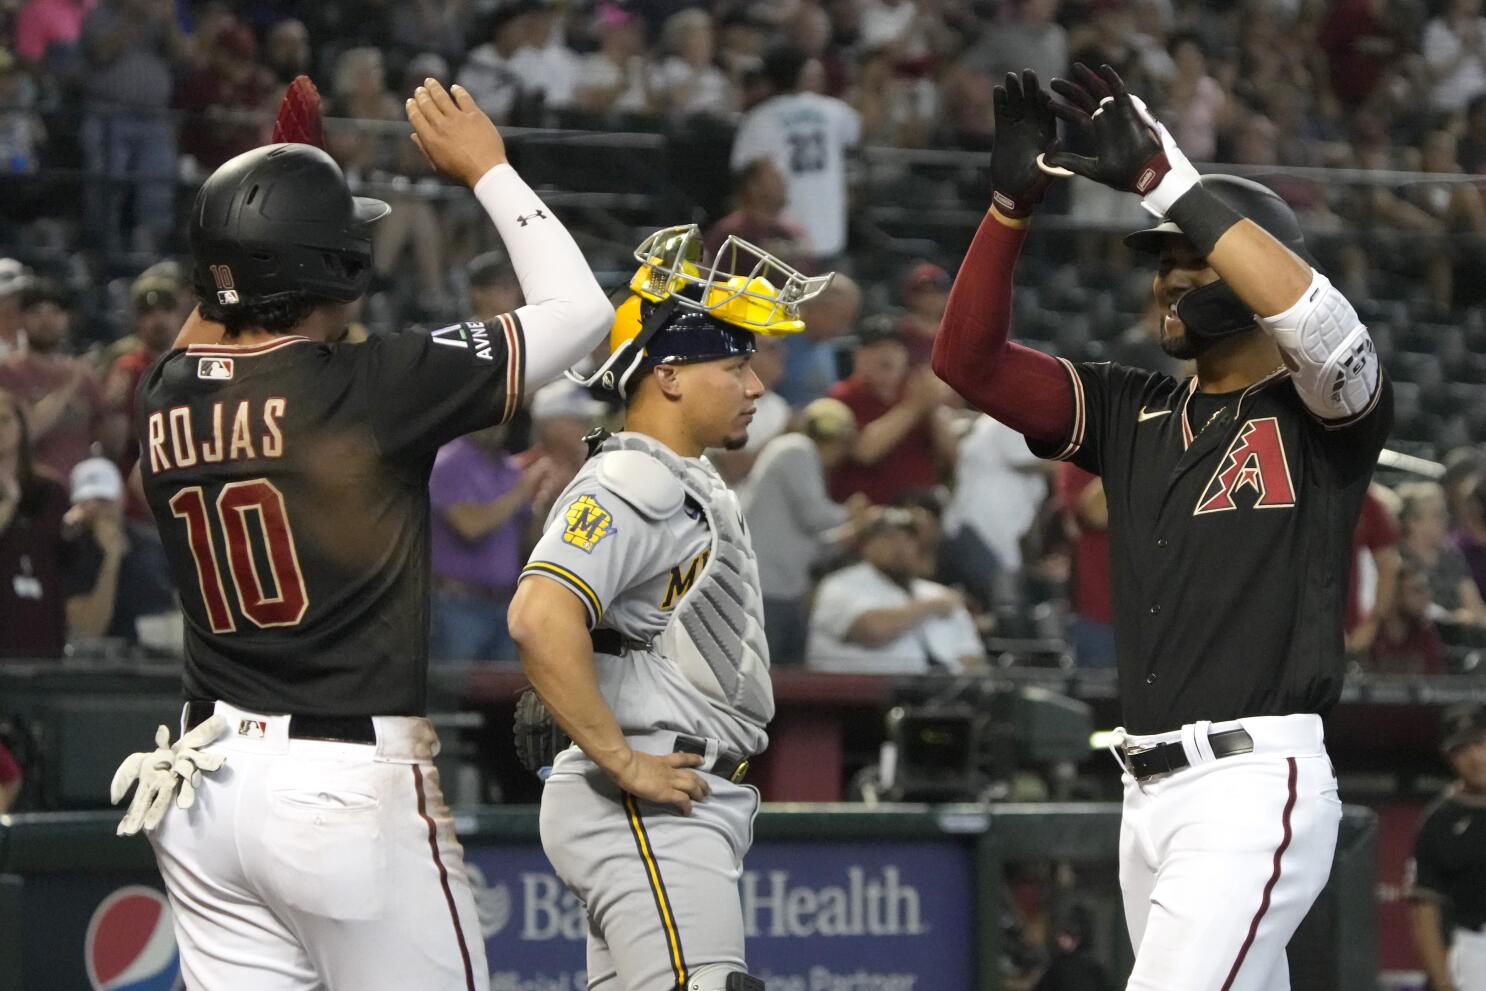 Gurriel hits 3-run homer, D-backs take series from Brewers - The